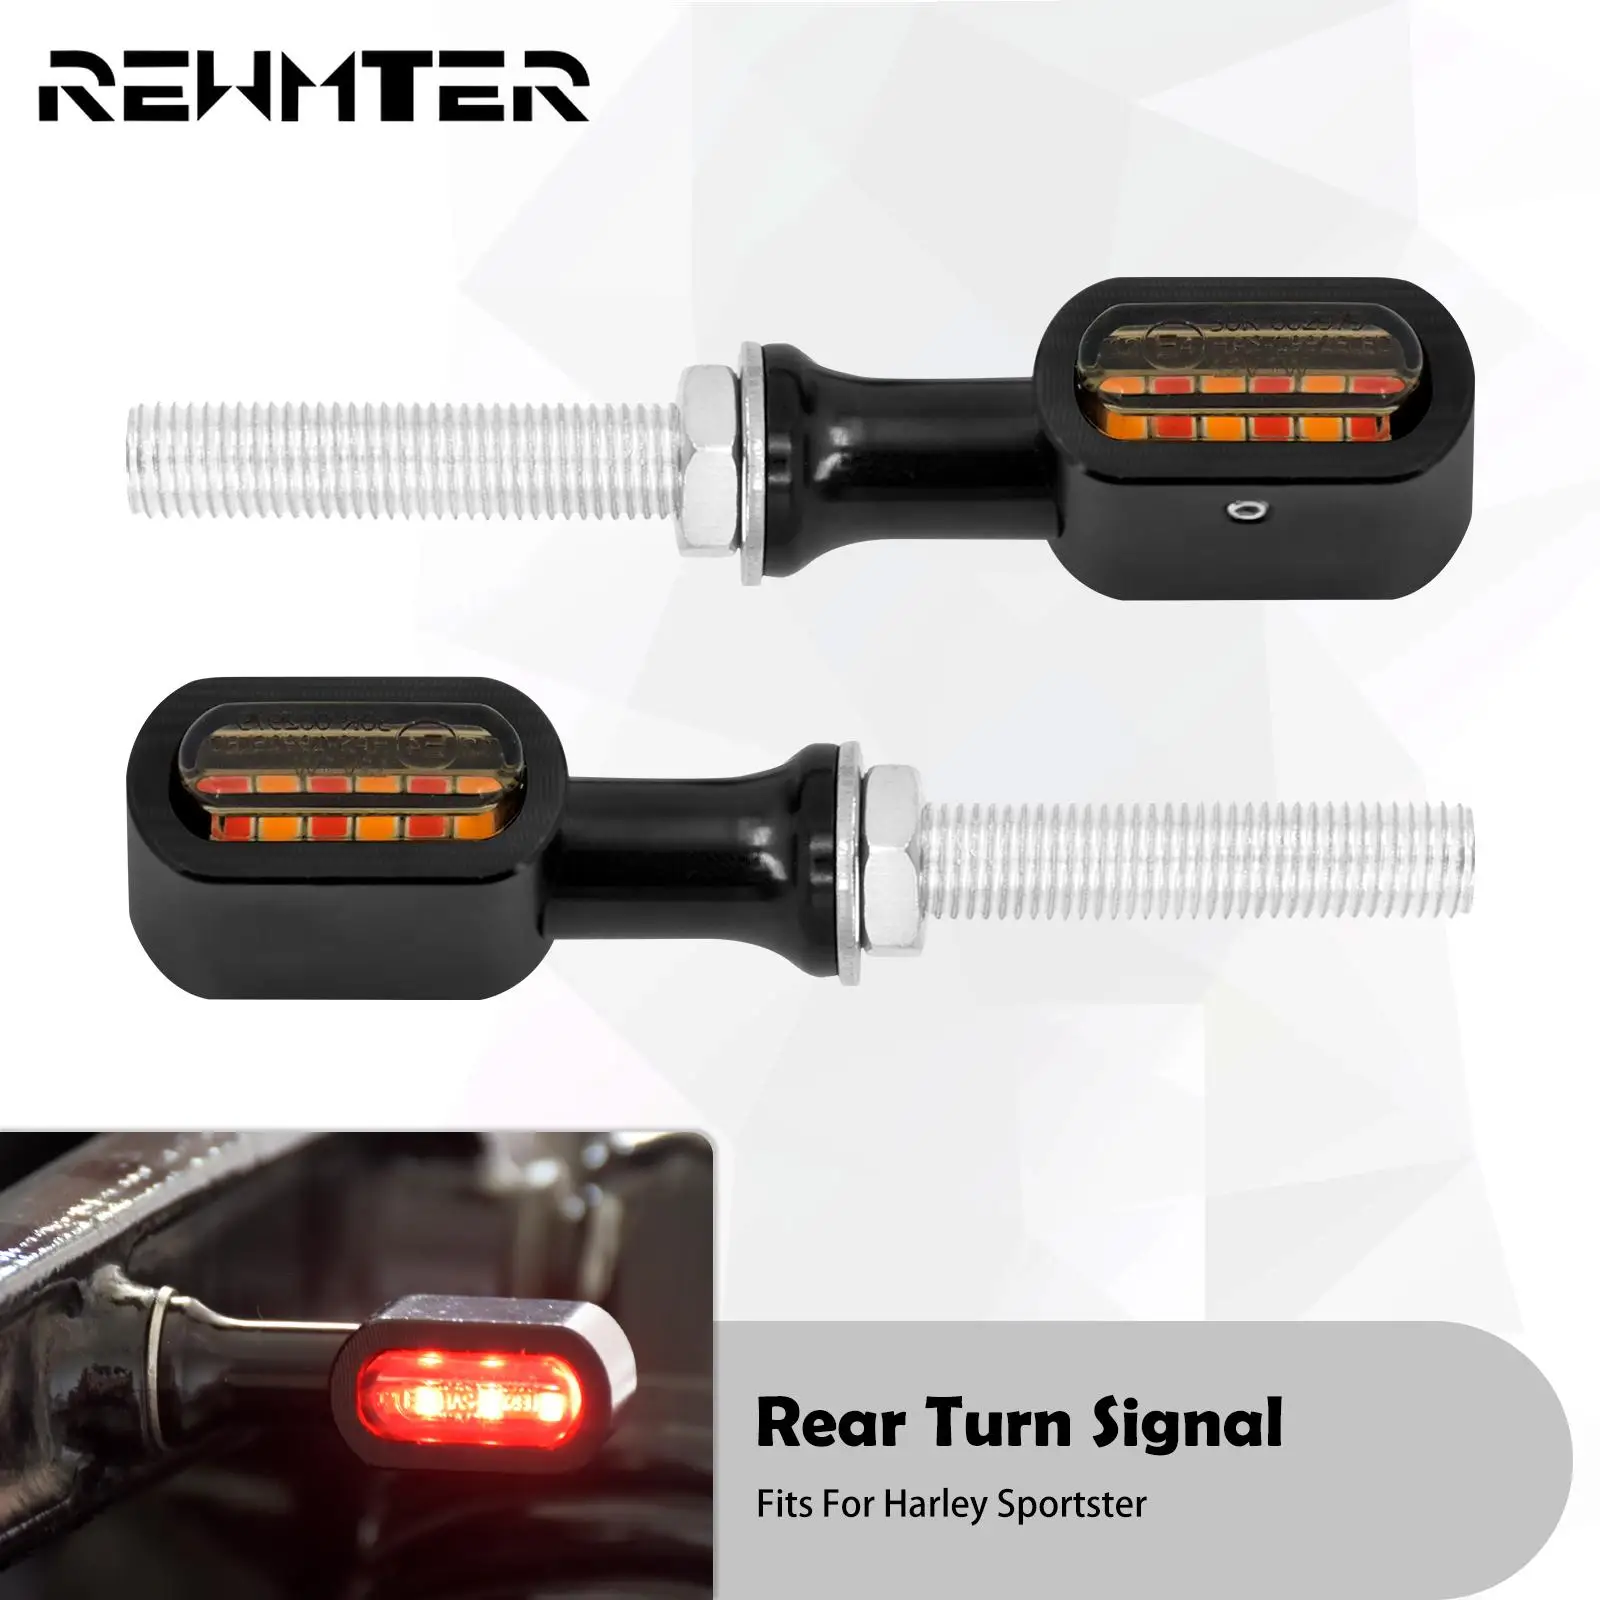 2xMotorcycle Mini Rear E Mark LED Turn Signal Red Running Brake Lamp For Harley Softail Touring Sportster XL 883 Cafe Racer Dyna